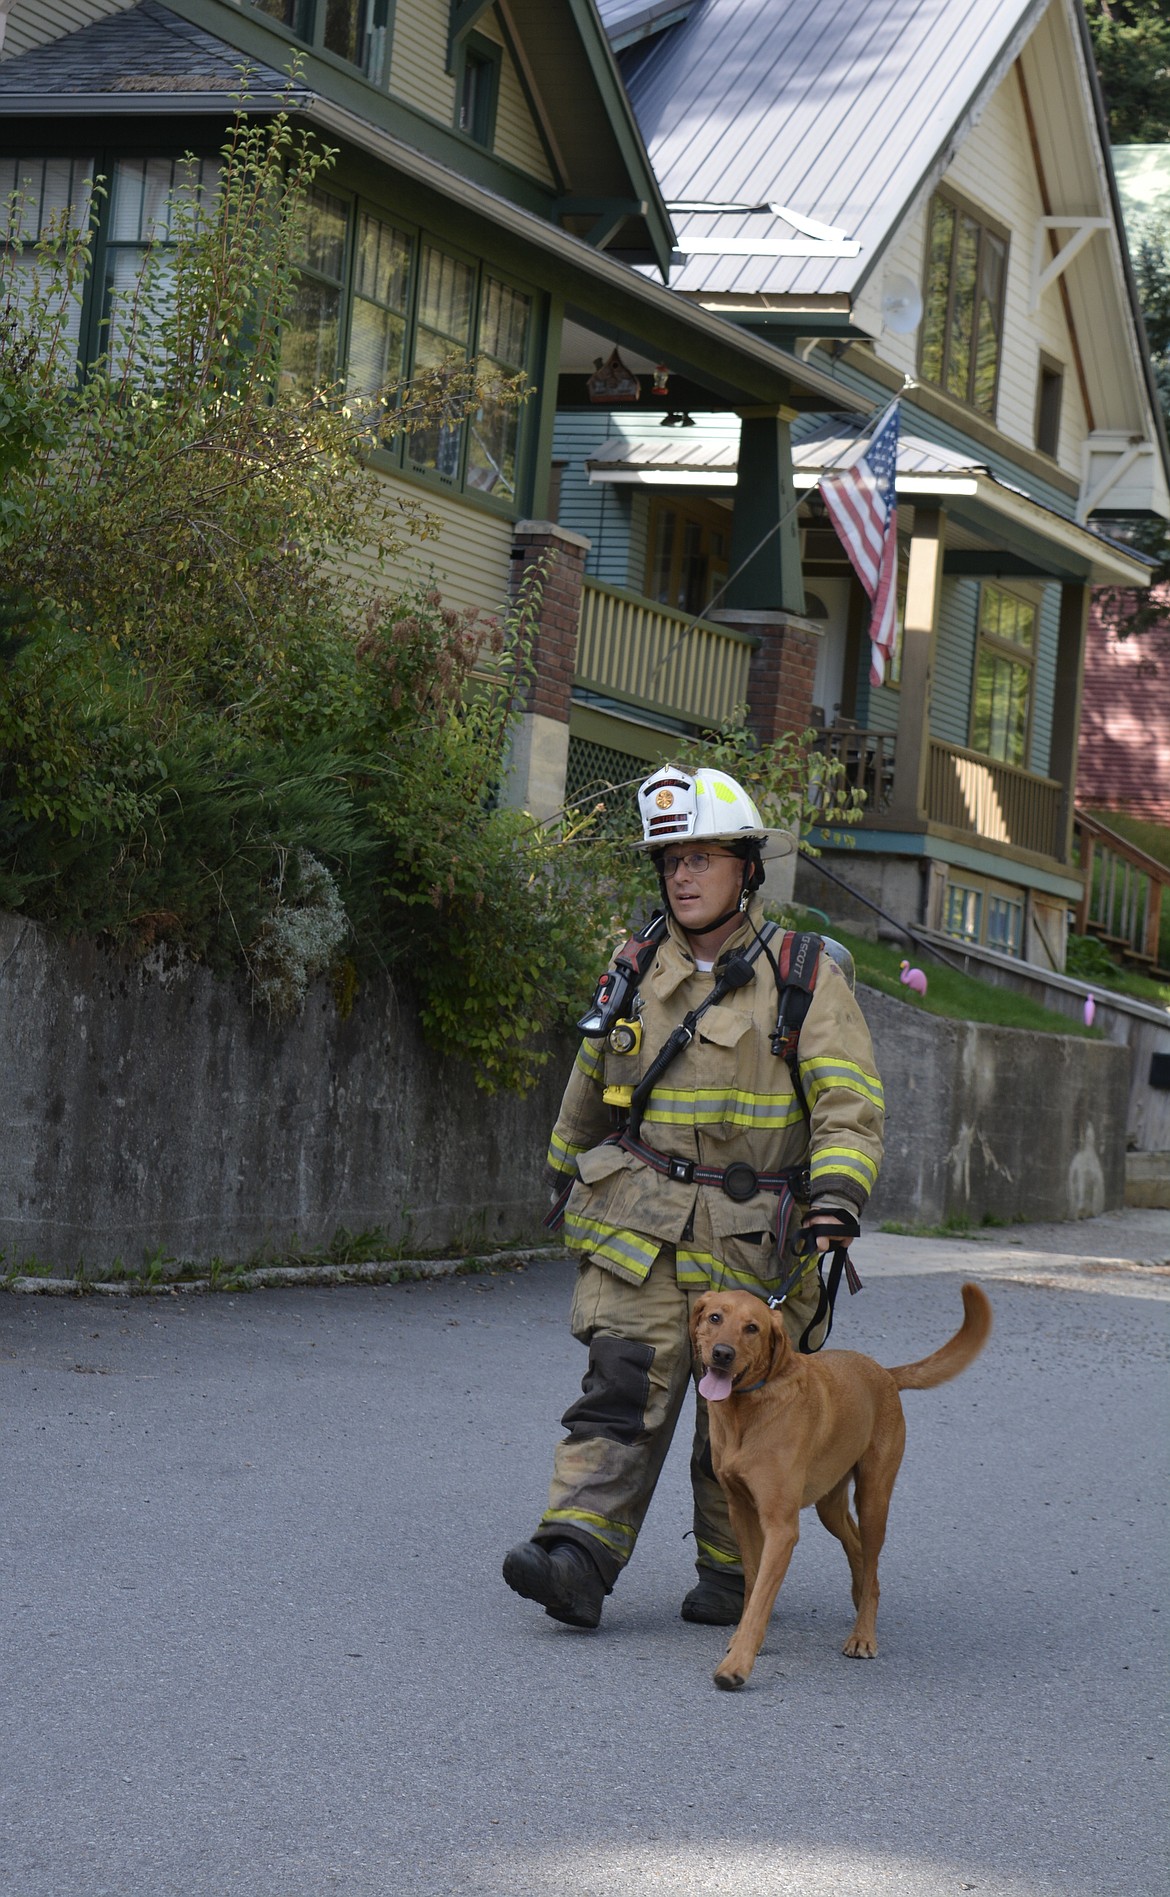 There was also a canine representative taking part in the 9/11 stair climb Monday morning. Shoshone County District 2 Fire Chief Scott Dietrich and Tamarack the search and recovery dog Tamarack made their way to begin another circuit.